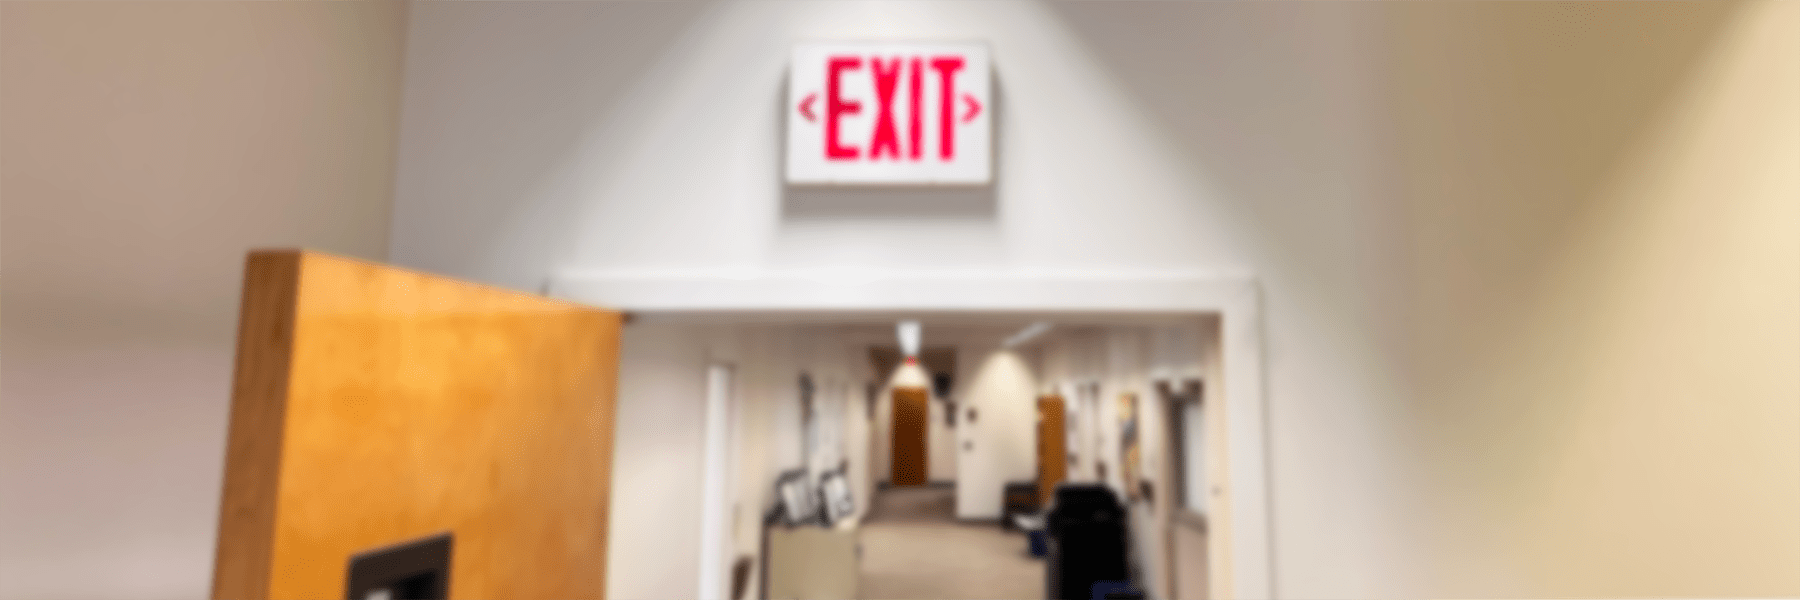 Blurred image of exit sign in hallway